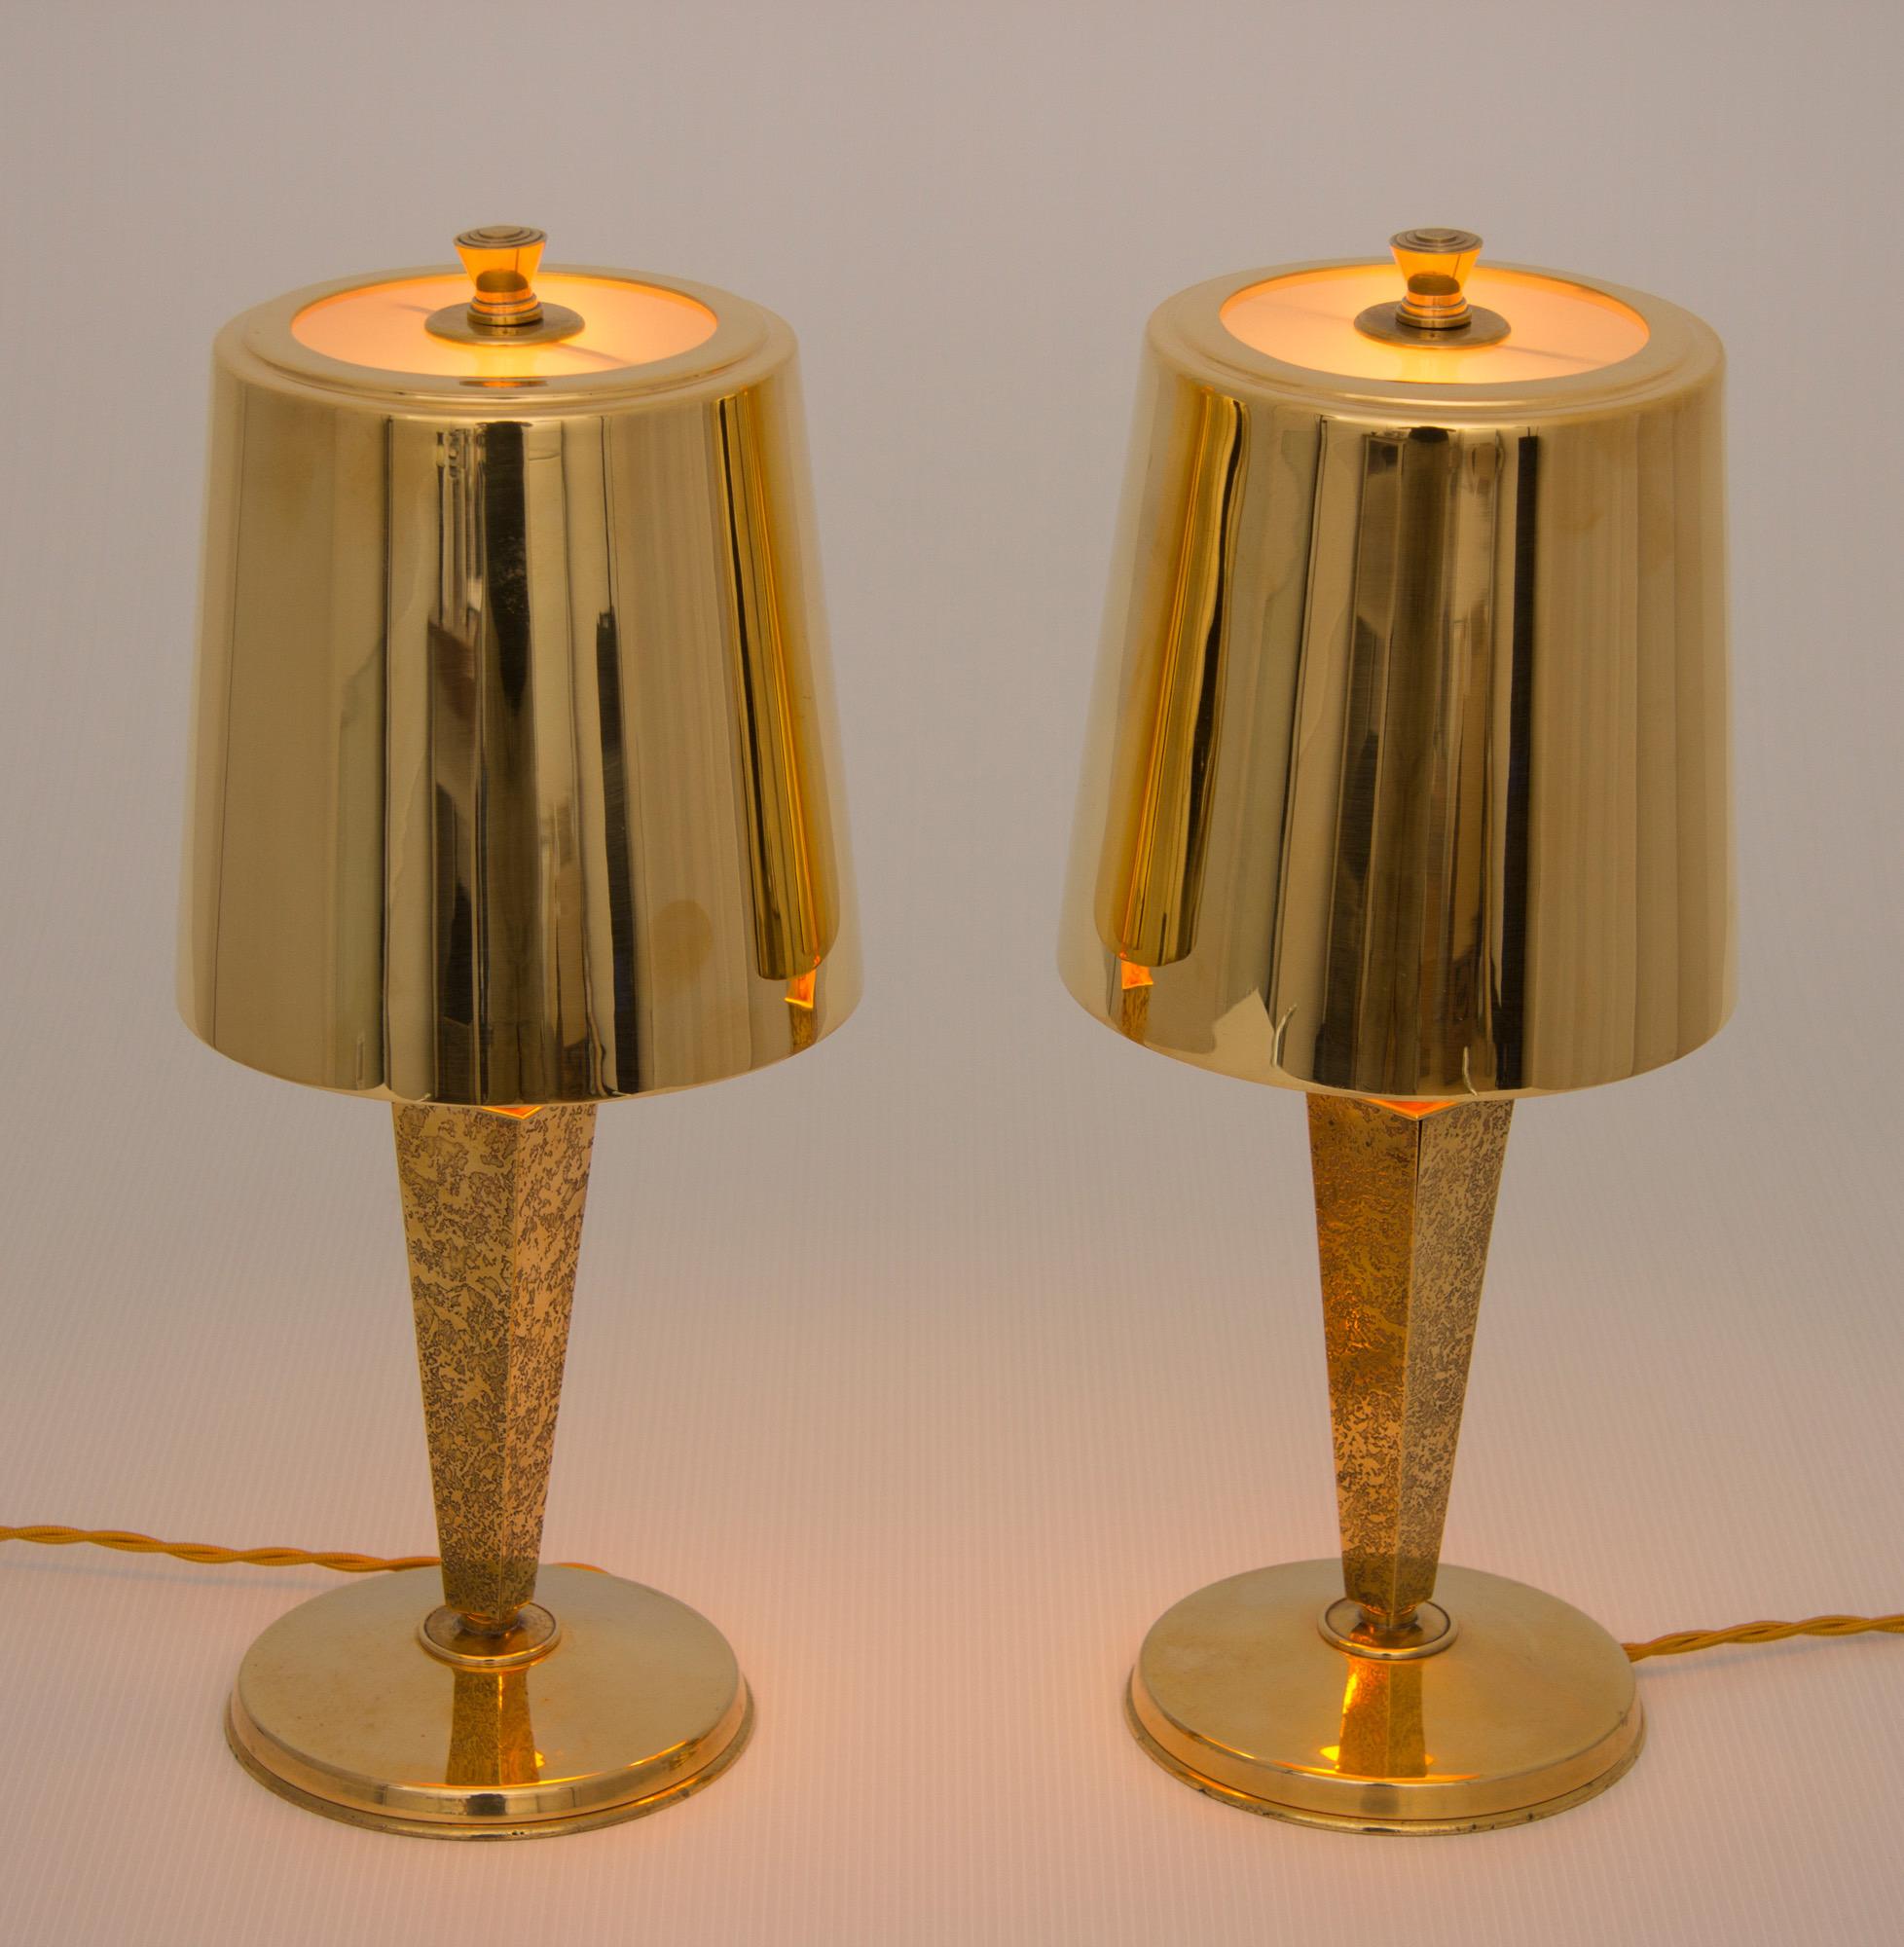 Art Deco Gilt bronze table lamps.
A pair of Art Deco table lamps, stunning gilded shades, the columns finished in a flocked gilt bronze.
Hollywood Regency table lamps by Genet and Michon.
Measures: H 42 cm W 16 cm D 16 cm
French, circa 1930.